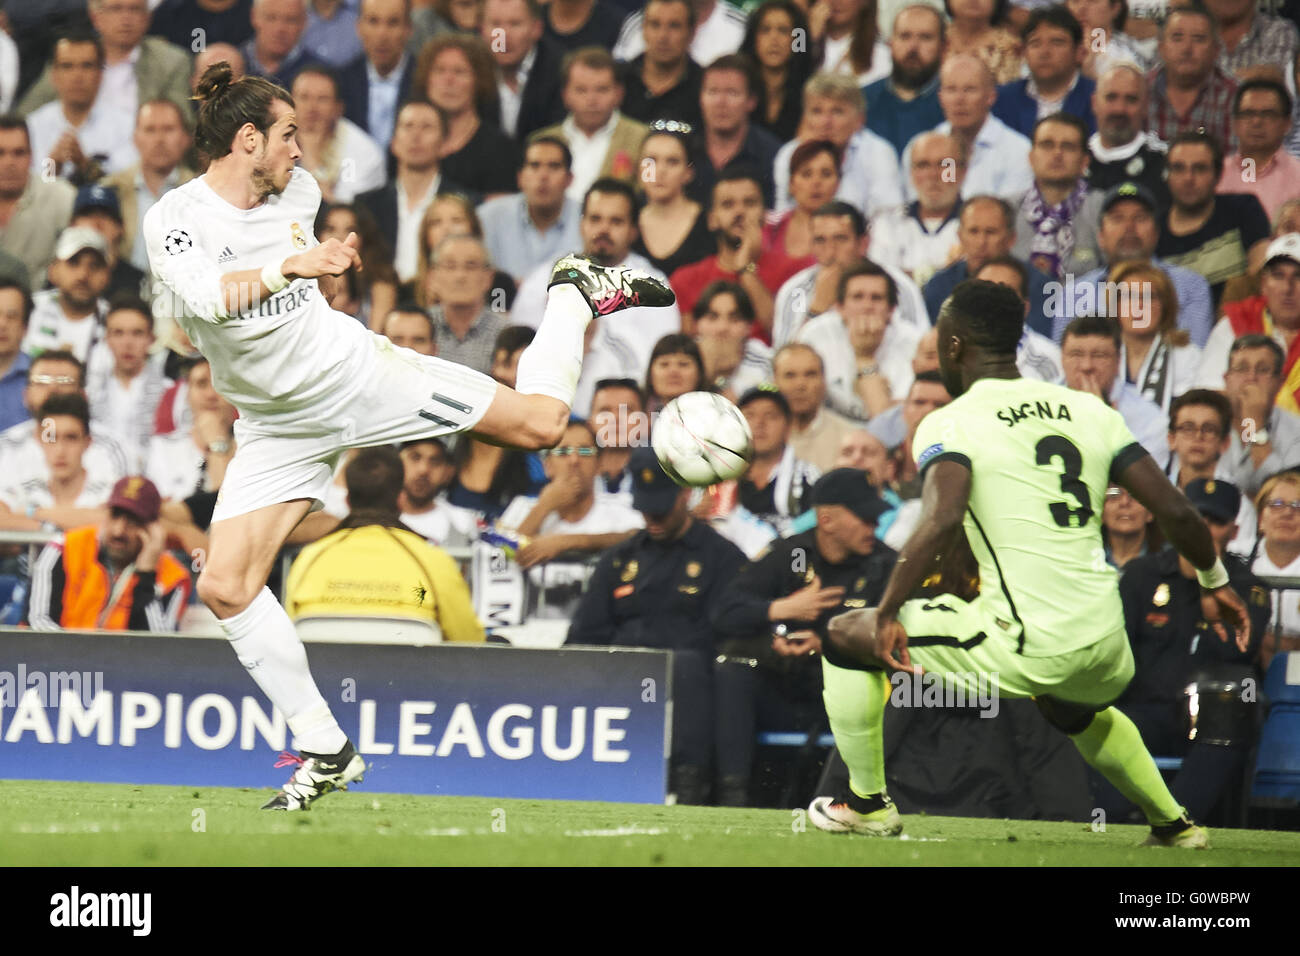 Madrid, Spain. 4th May, 2016. Gareth Bale (midfielder; Real Madrid), Bacary Sagna (defender; Manchester City FC) in action during the UEFA Champions League match between Real Madrid and Manchester City FC at Santiago Bernabeu on May 4, 2016 in Madrid Credit:  Jack Abuin/ZUMA Wire/Alamy Live News Stock Photo